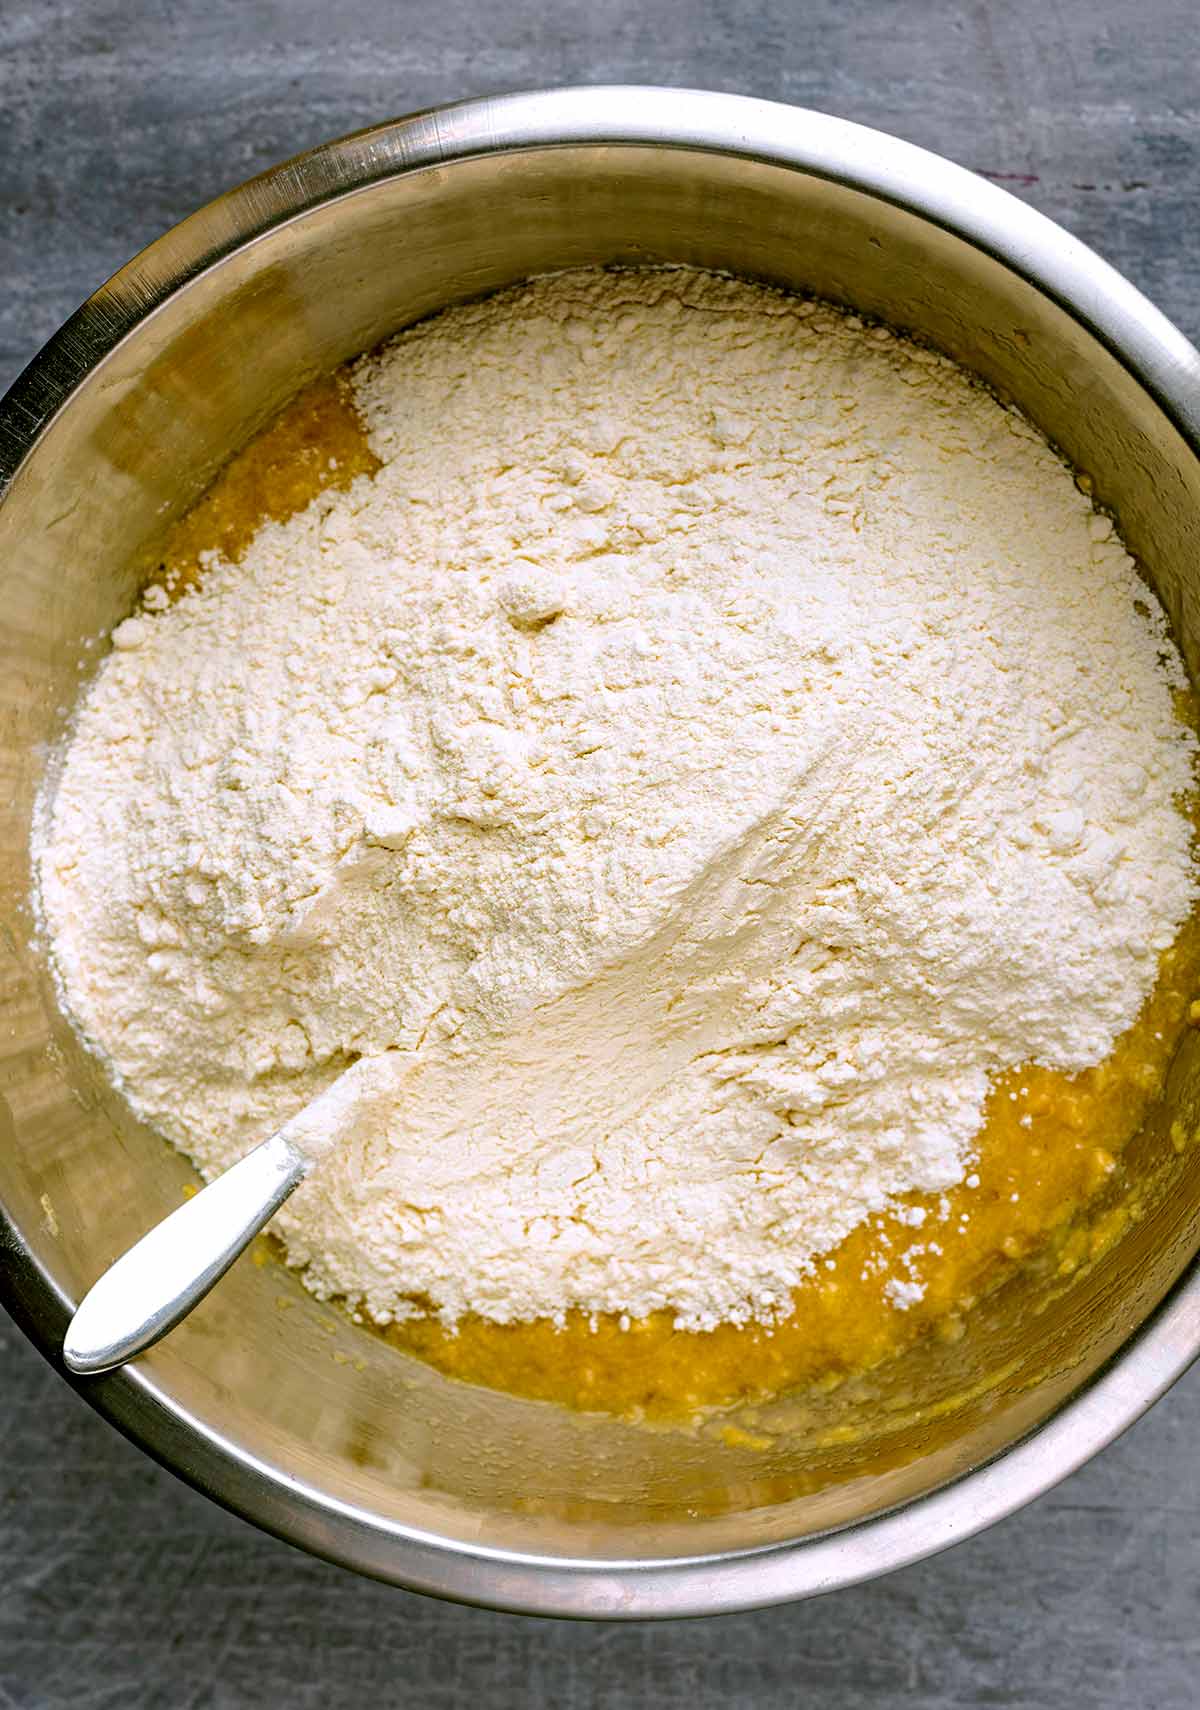 The flour and cinnamon added to the banana mixture.